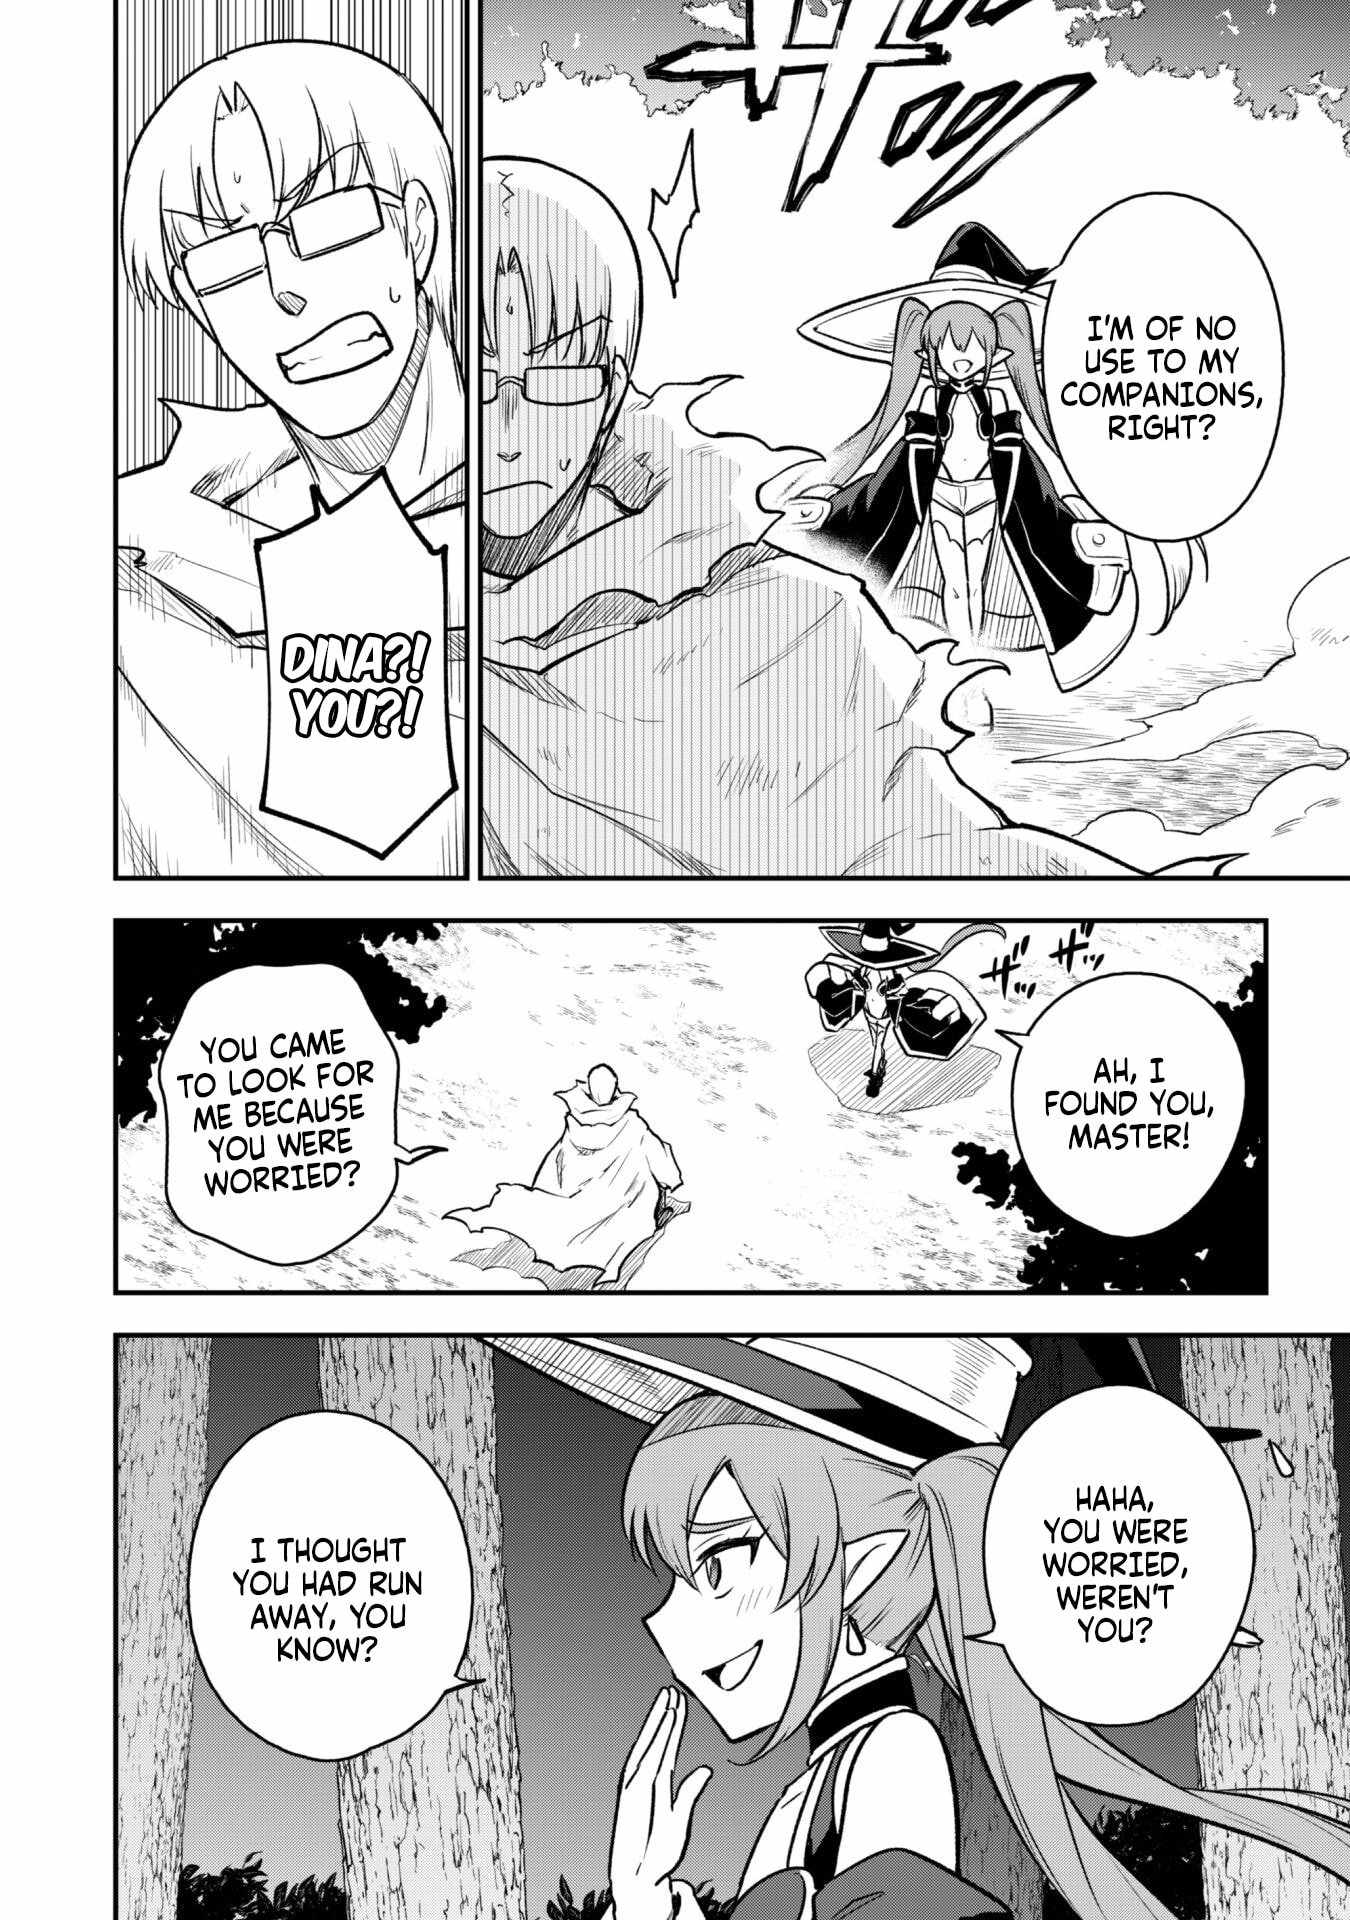 The White Mage Who Joined My Party Is a Circle Crusher, So My Isekai Life Is at Risk of Collapsing Once Again Chapter 12-1-eng-li - Page 3